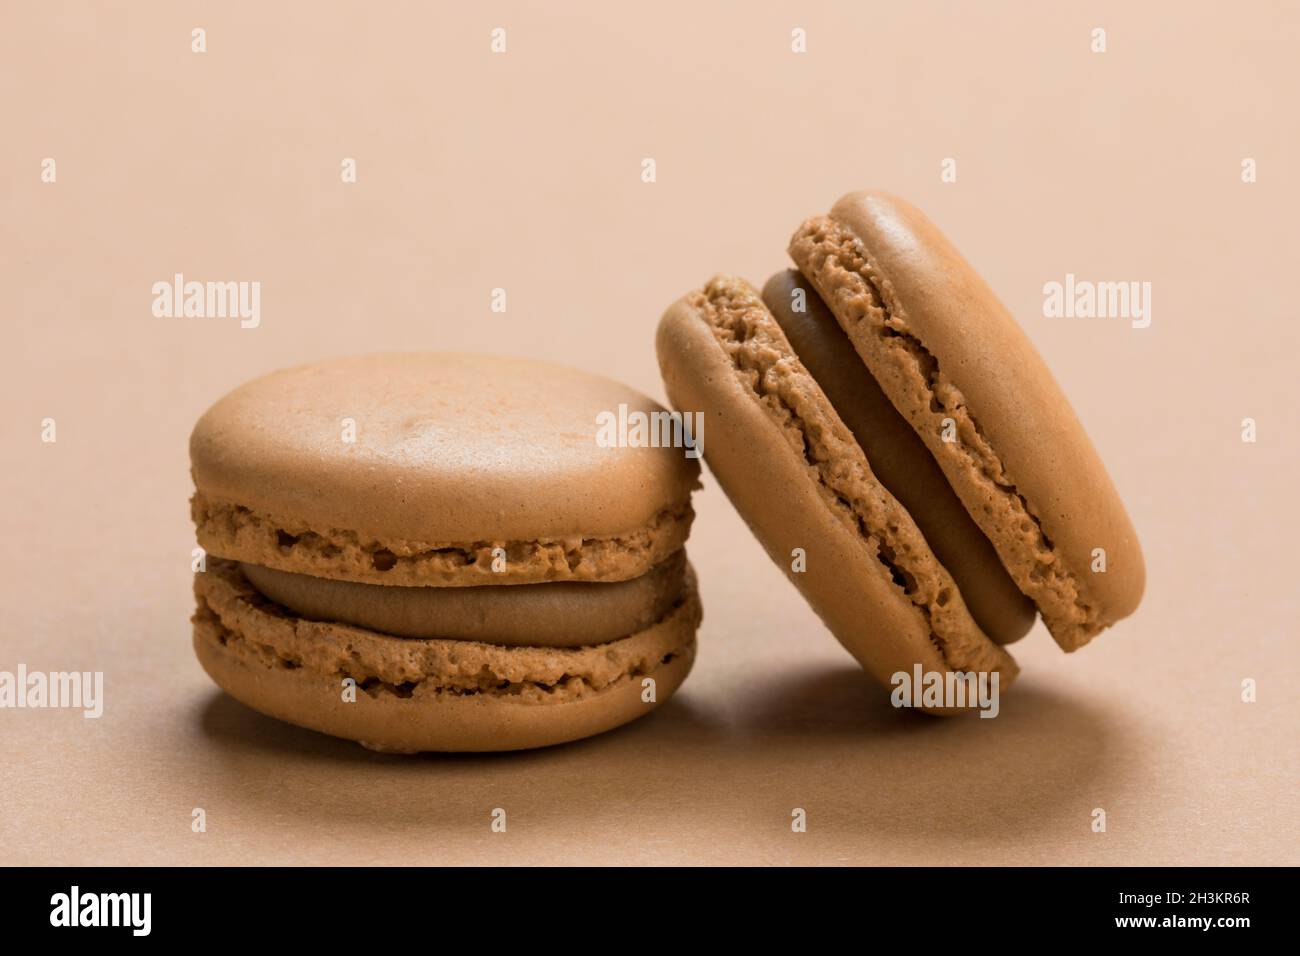 Coffee flavor French macaron cookies closeup on background of a similar light brown colour Stock Photo